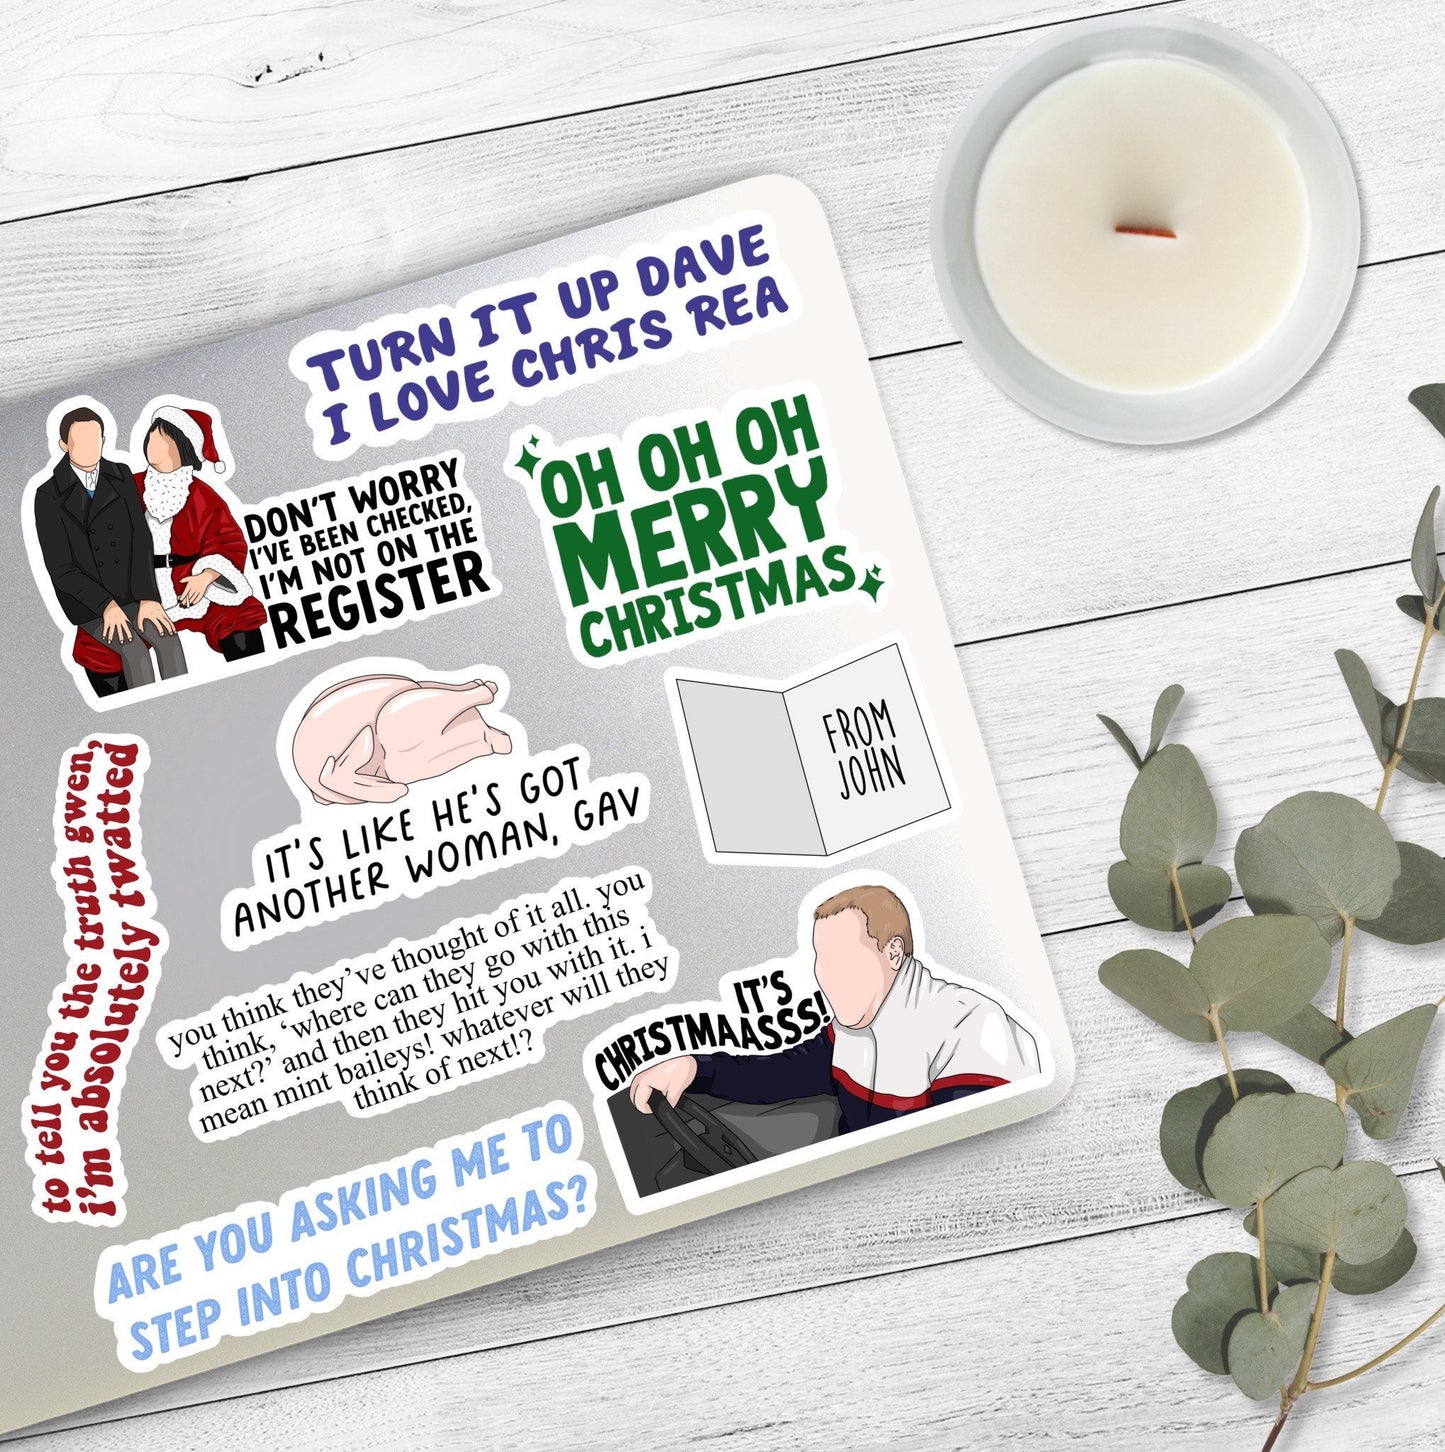 To Tell You The Truth Gwen I’m Absolutely Twatted  | Doris | Gavin & Stacey Christmas Stickers